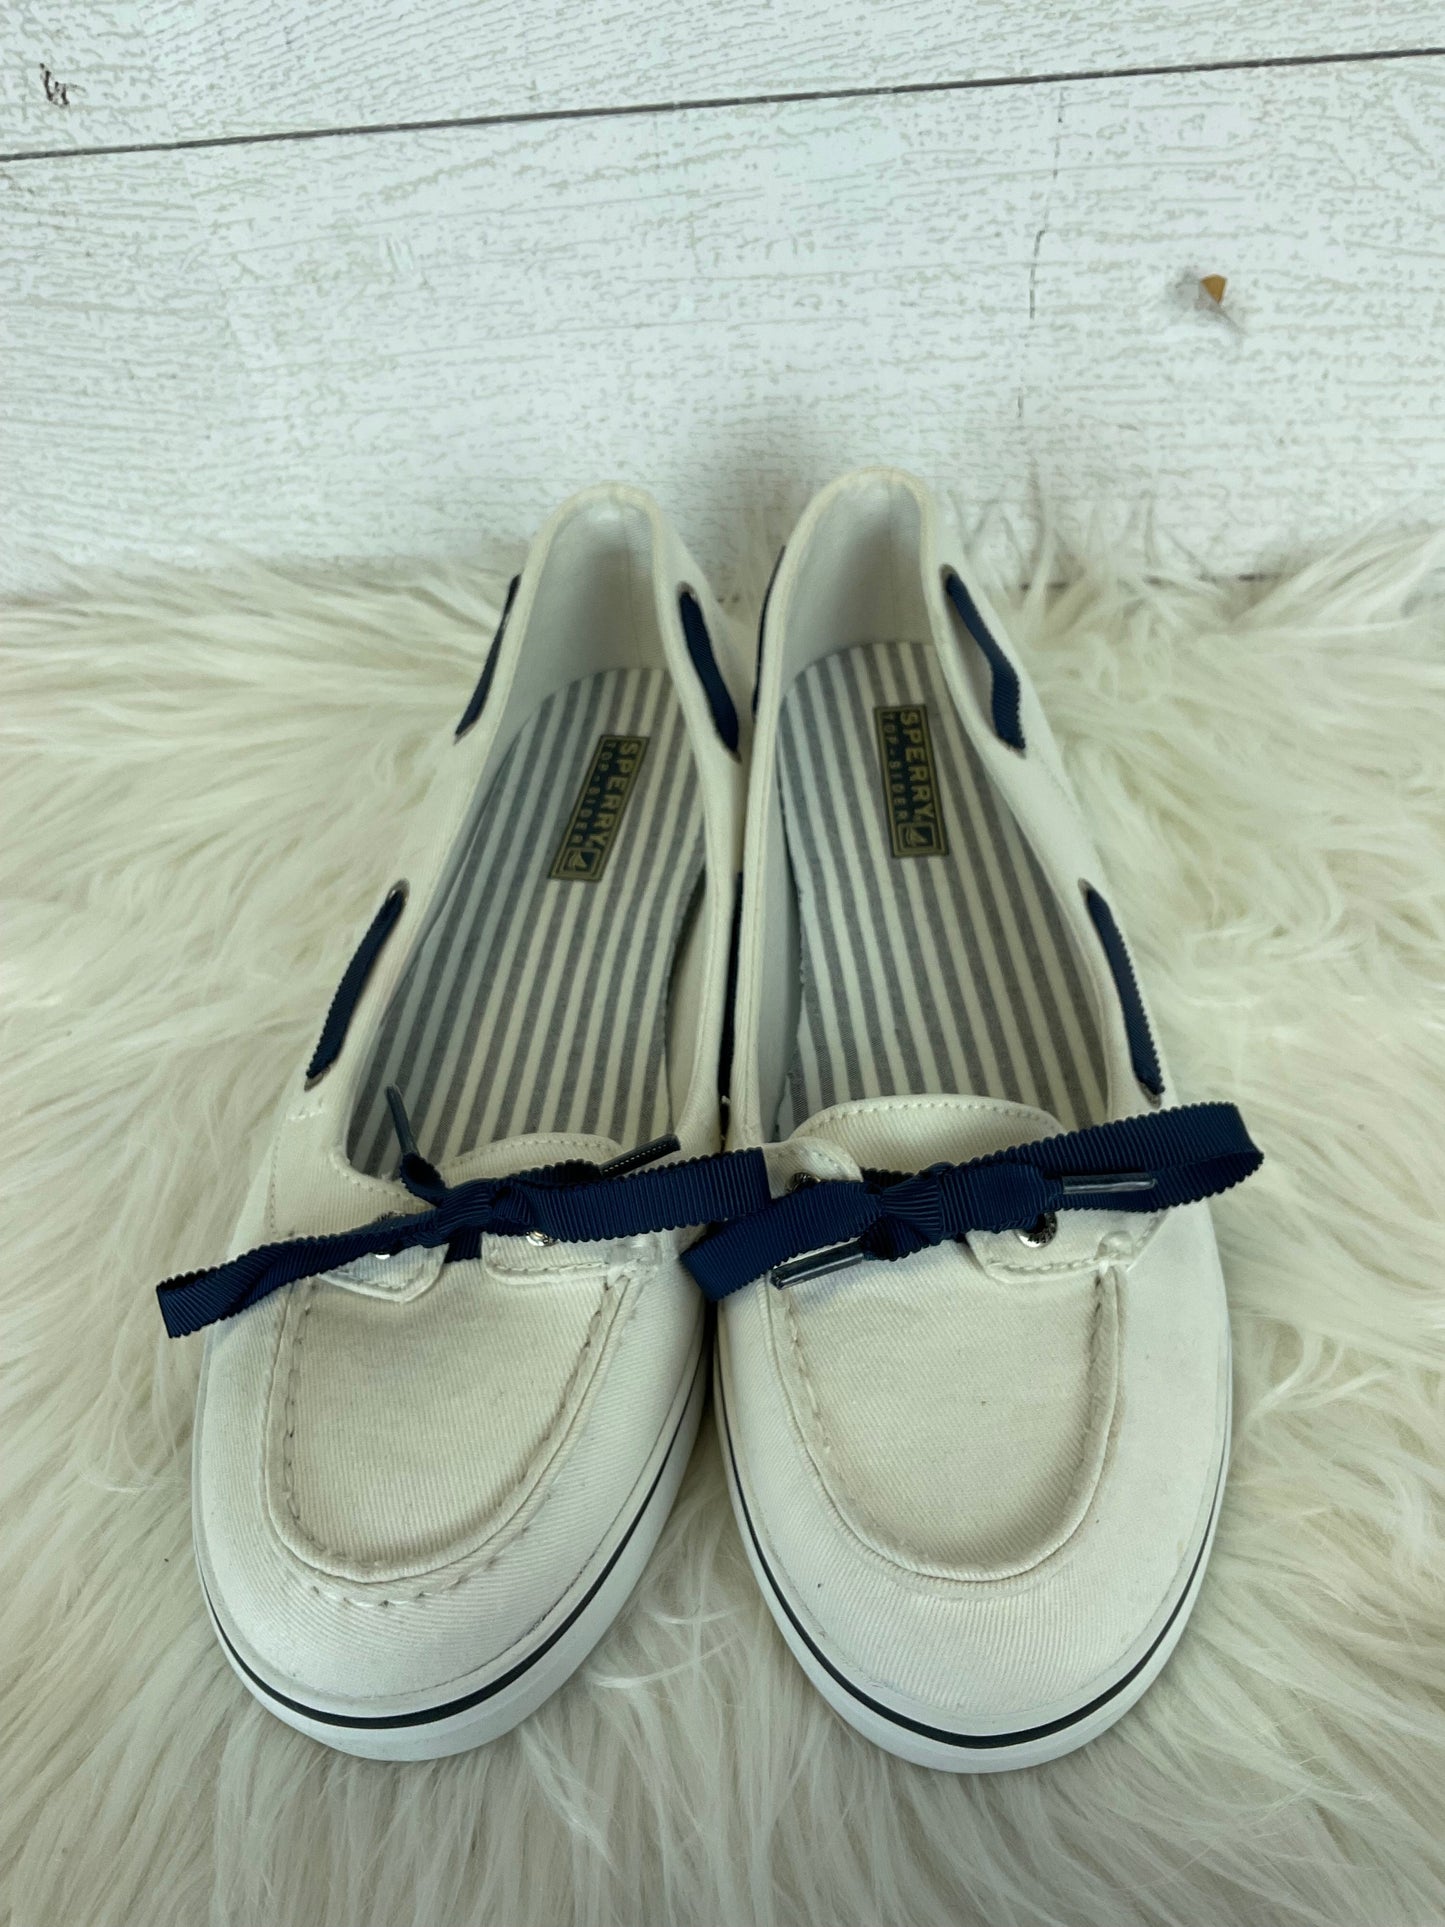 White Shoes Flats Sperry, Size 9.5